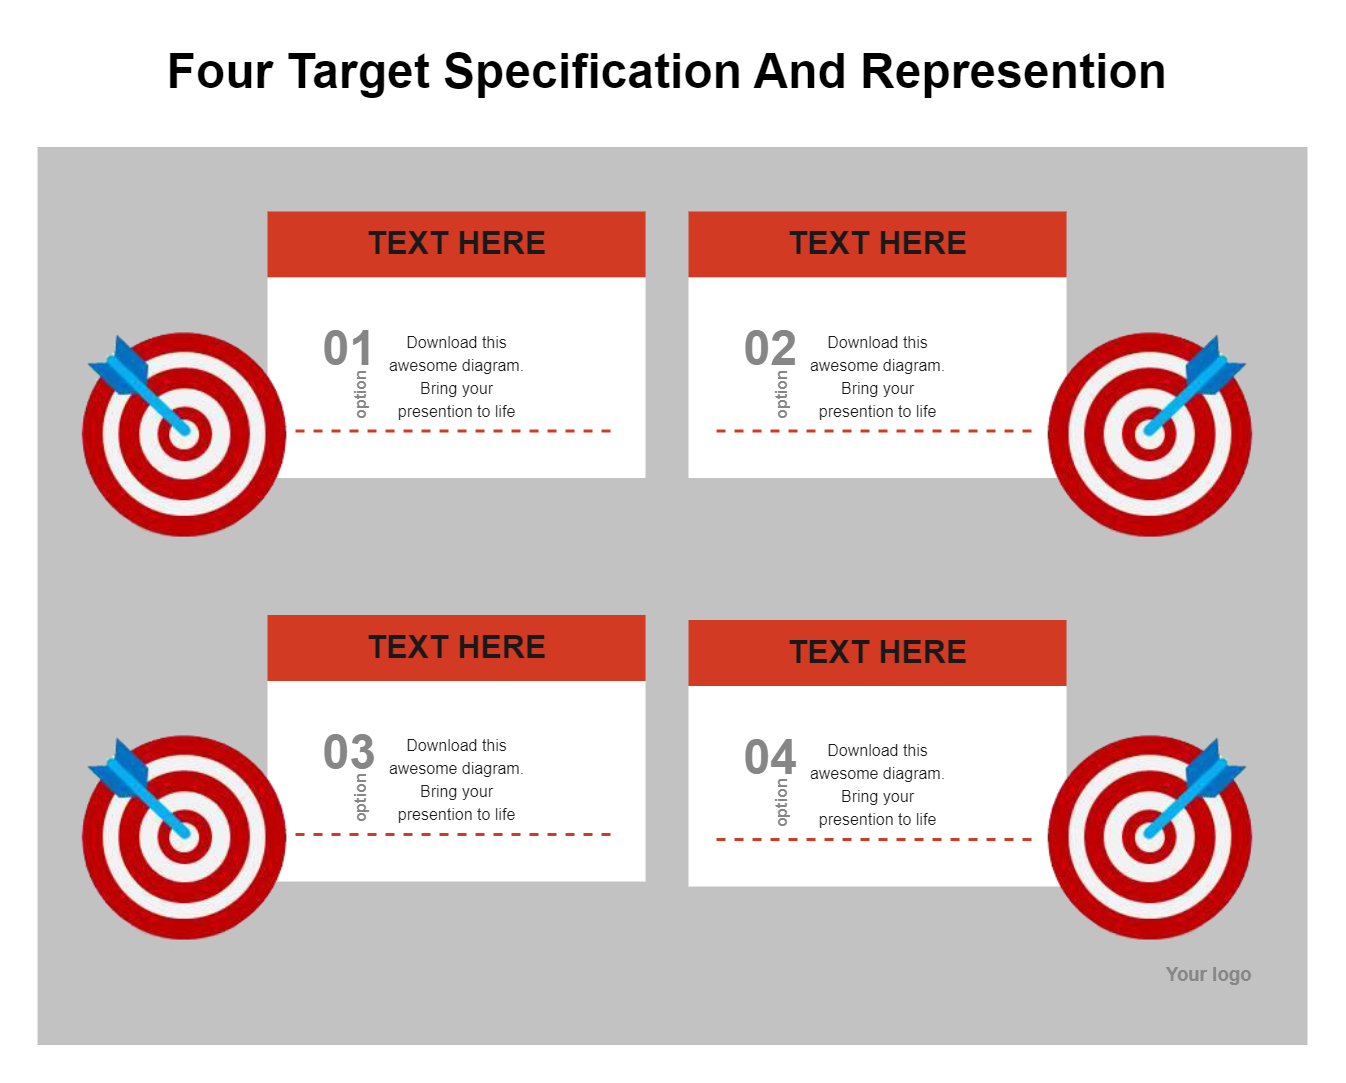 Four Target Specification And Representation